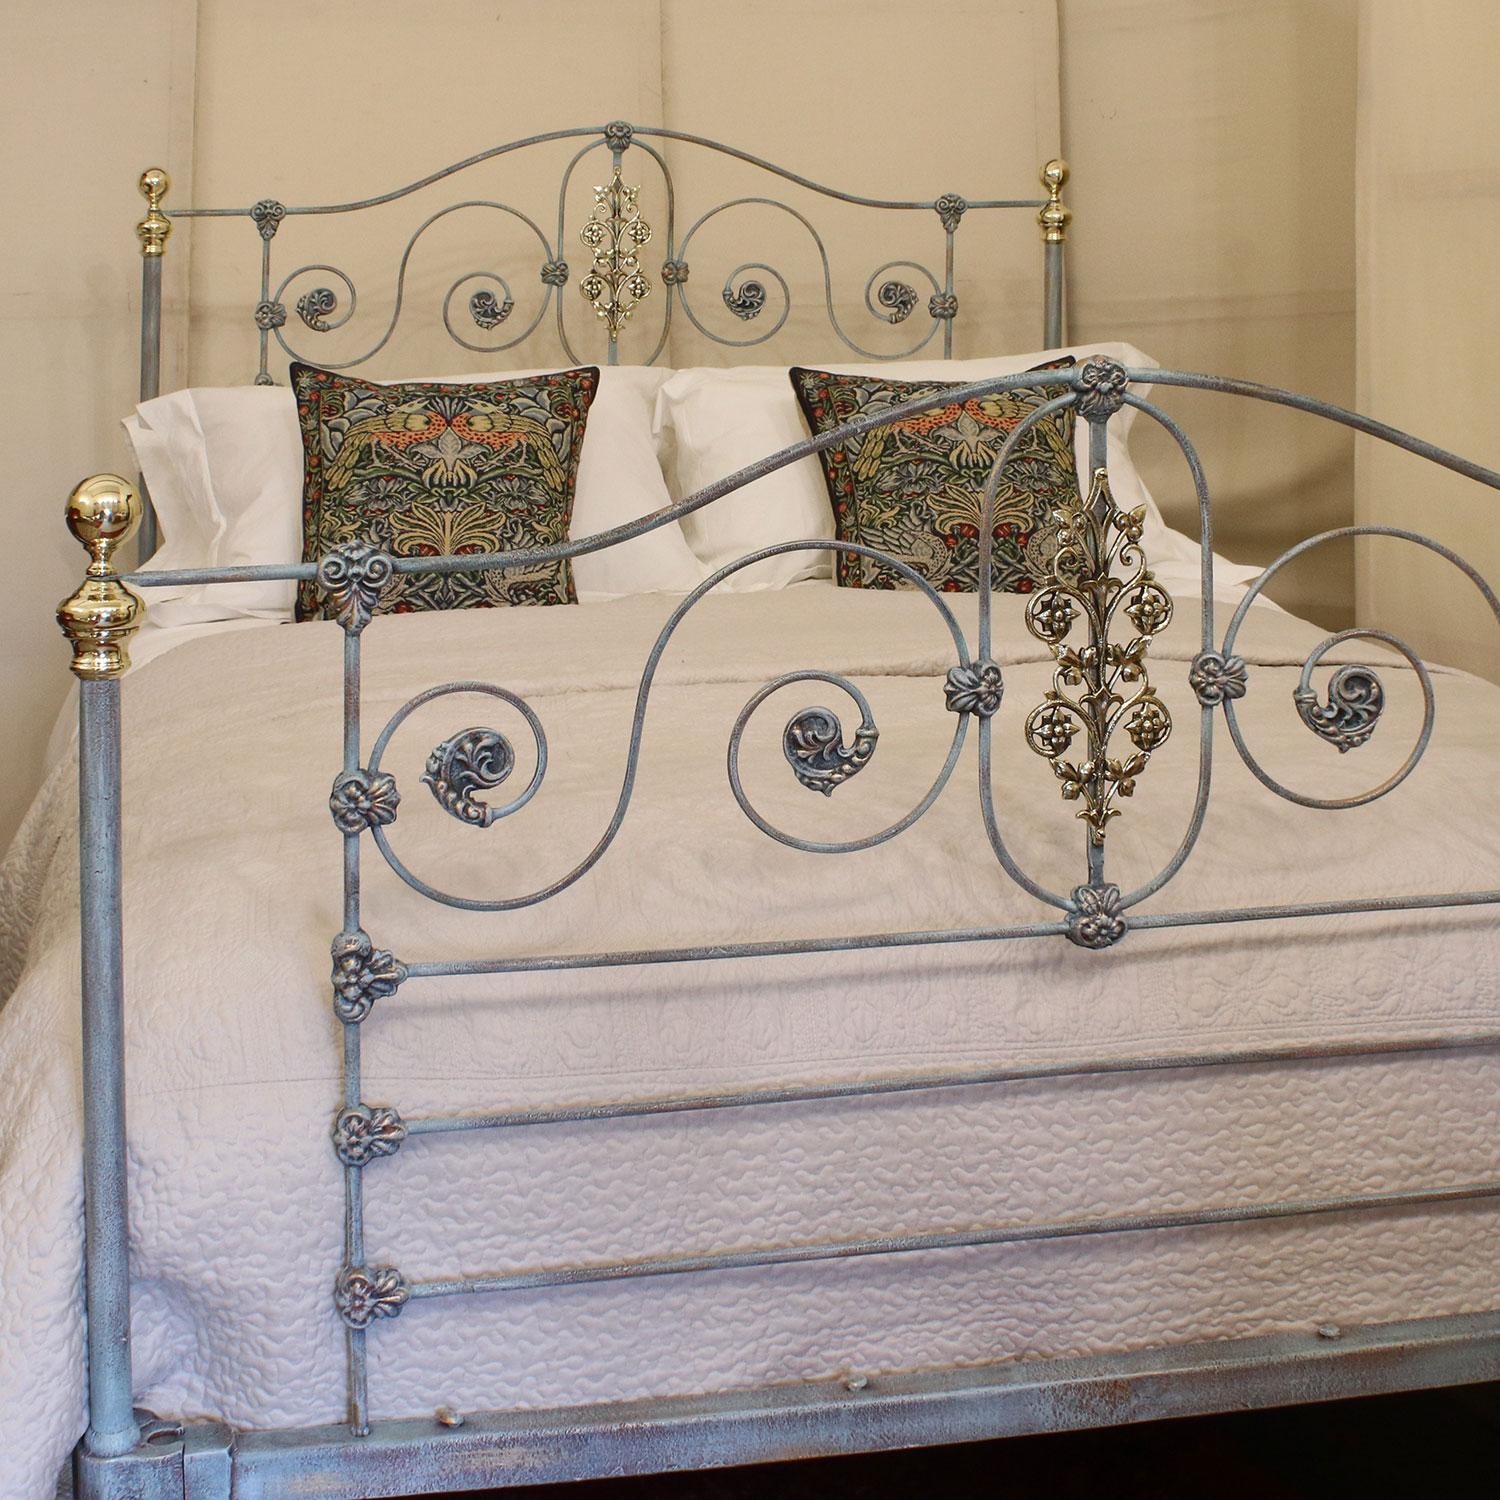 Mid Victorian cast iron bed finished in blue Verdigris with decoratively cast panels.

This bed accepts a British King or American Queen (60in, 5ft or 150cm wide) base and mattress.

The price is for the bed frame alone. The base, mattress,